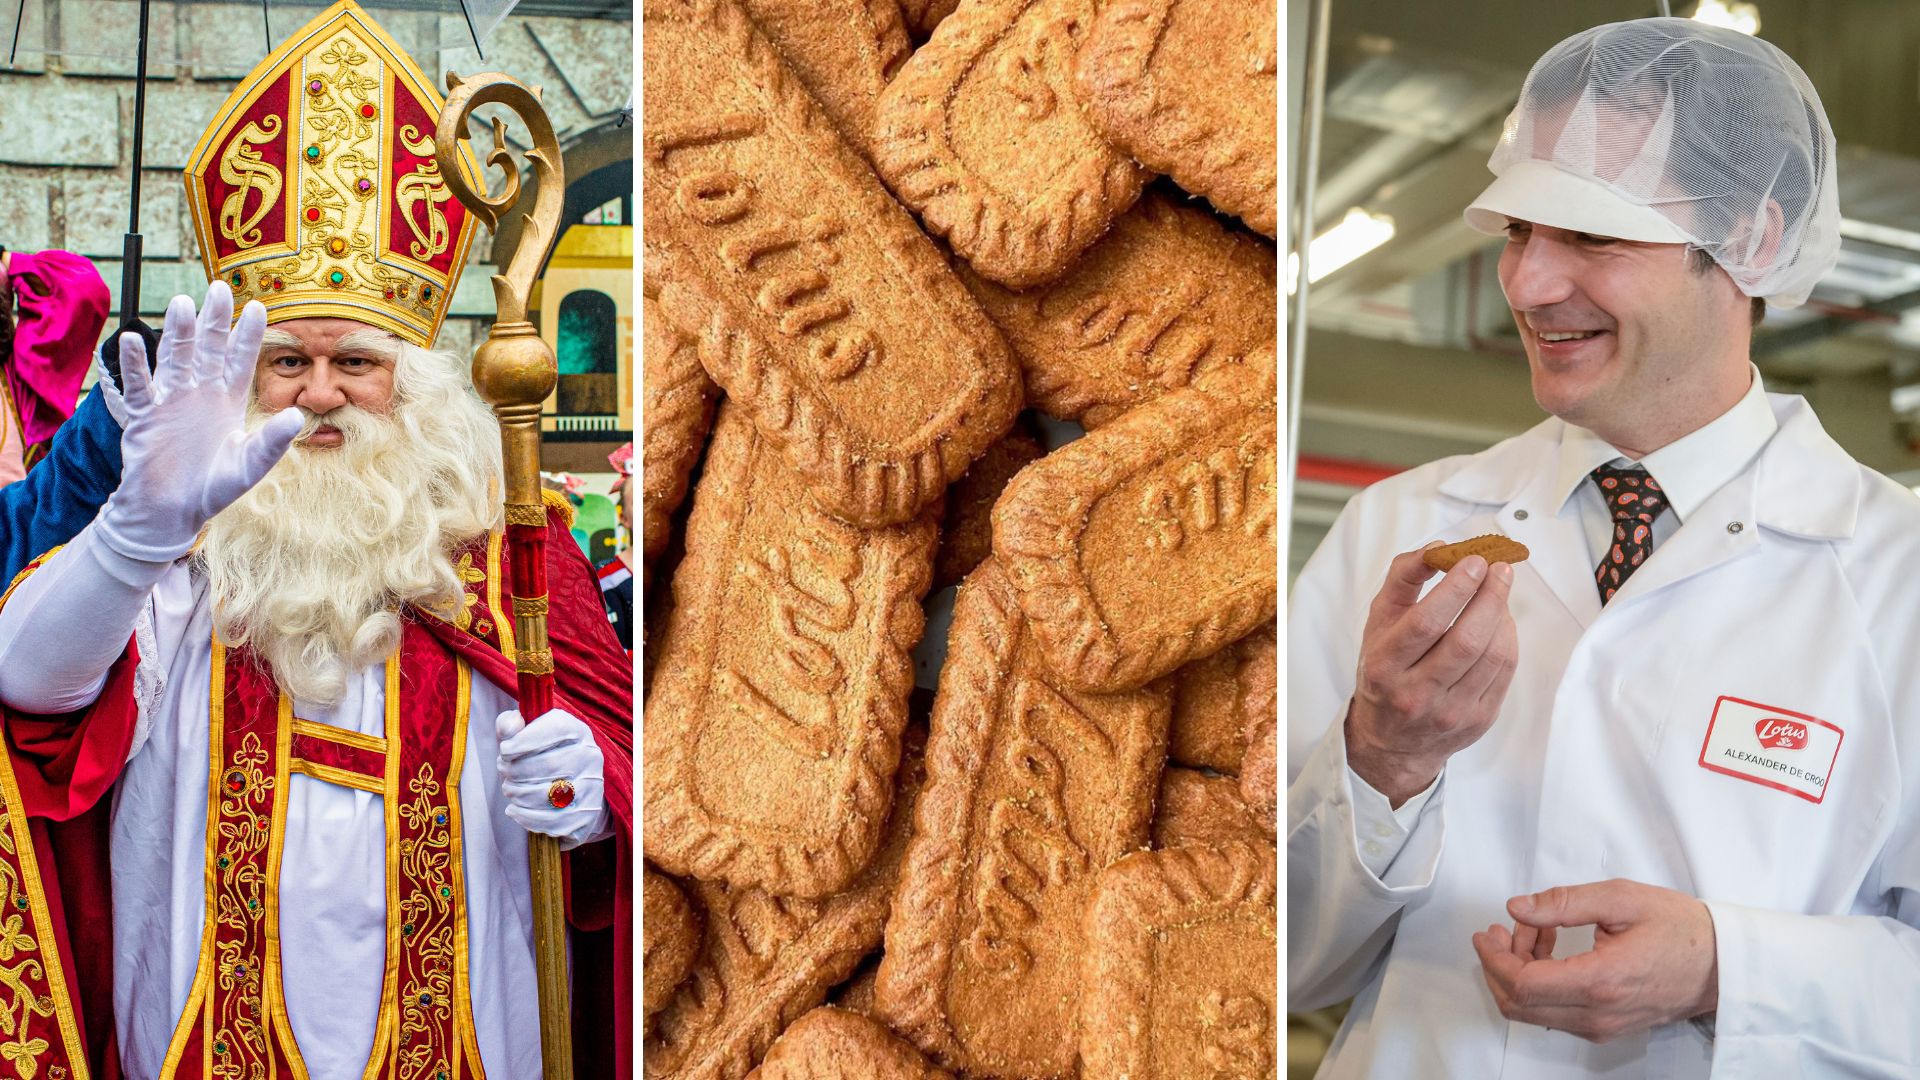 The story of Speculoos: The Belgian biscuit that united a nation